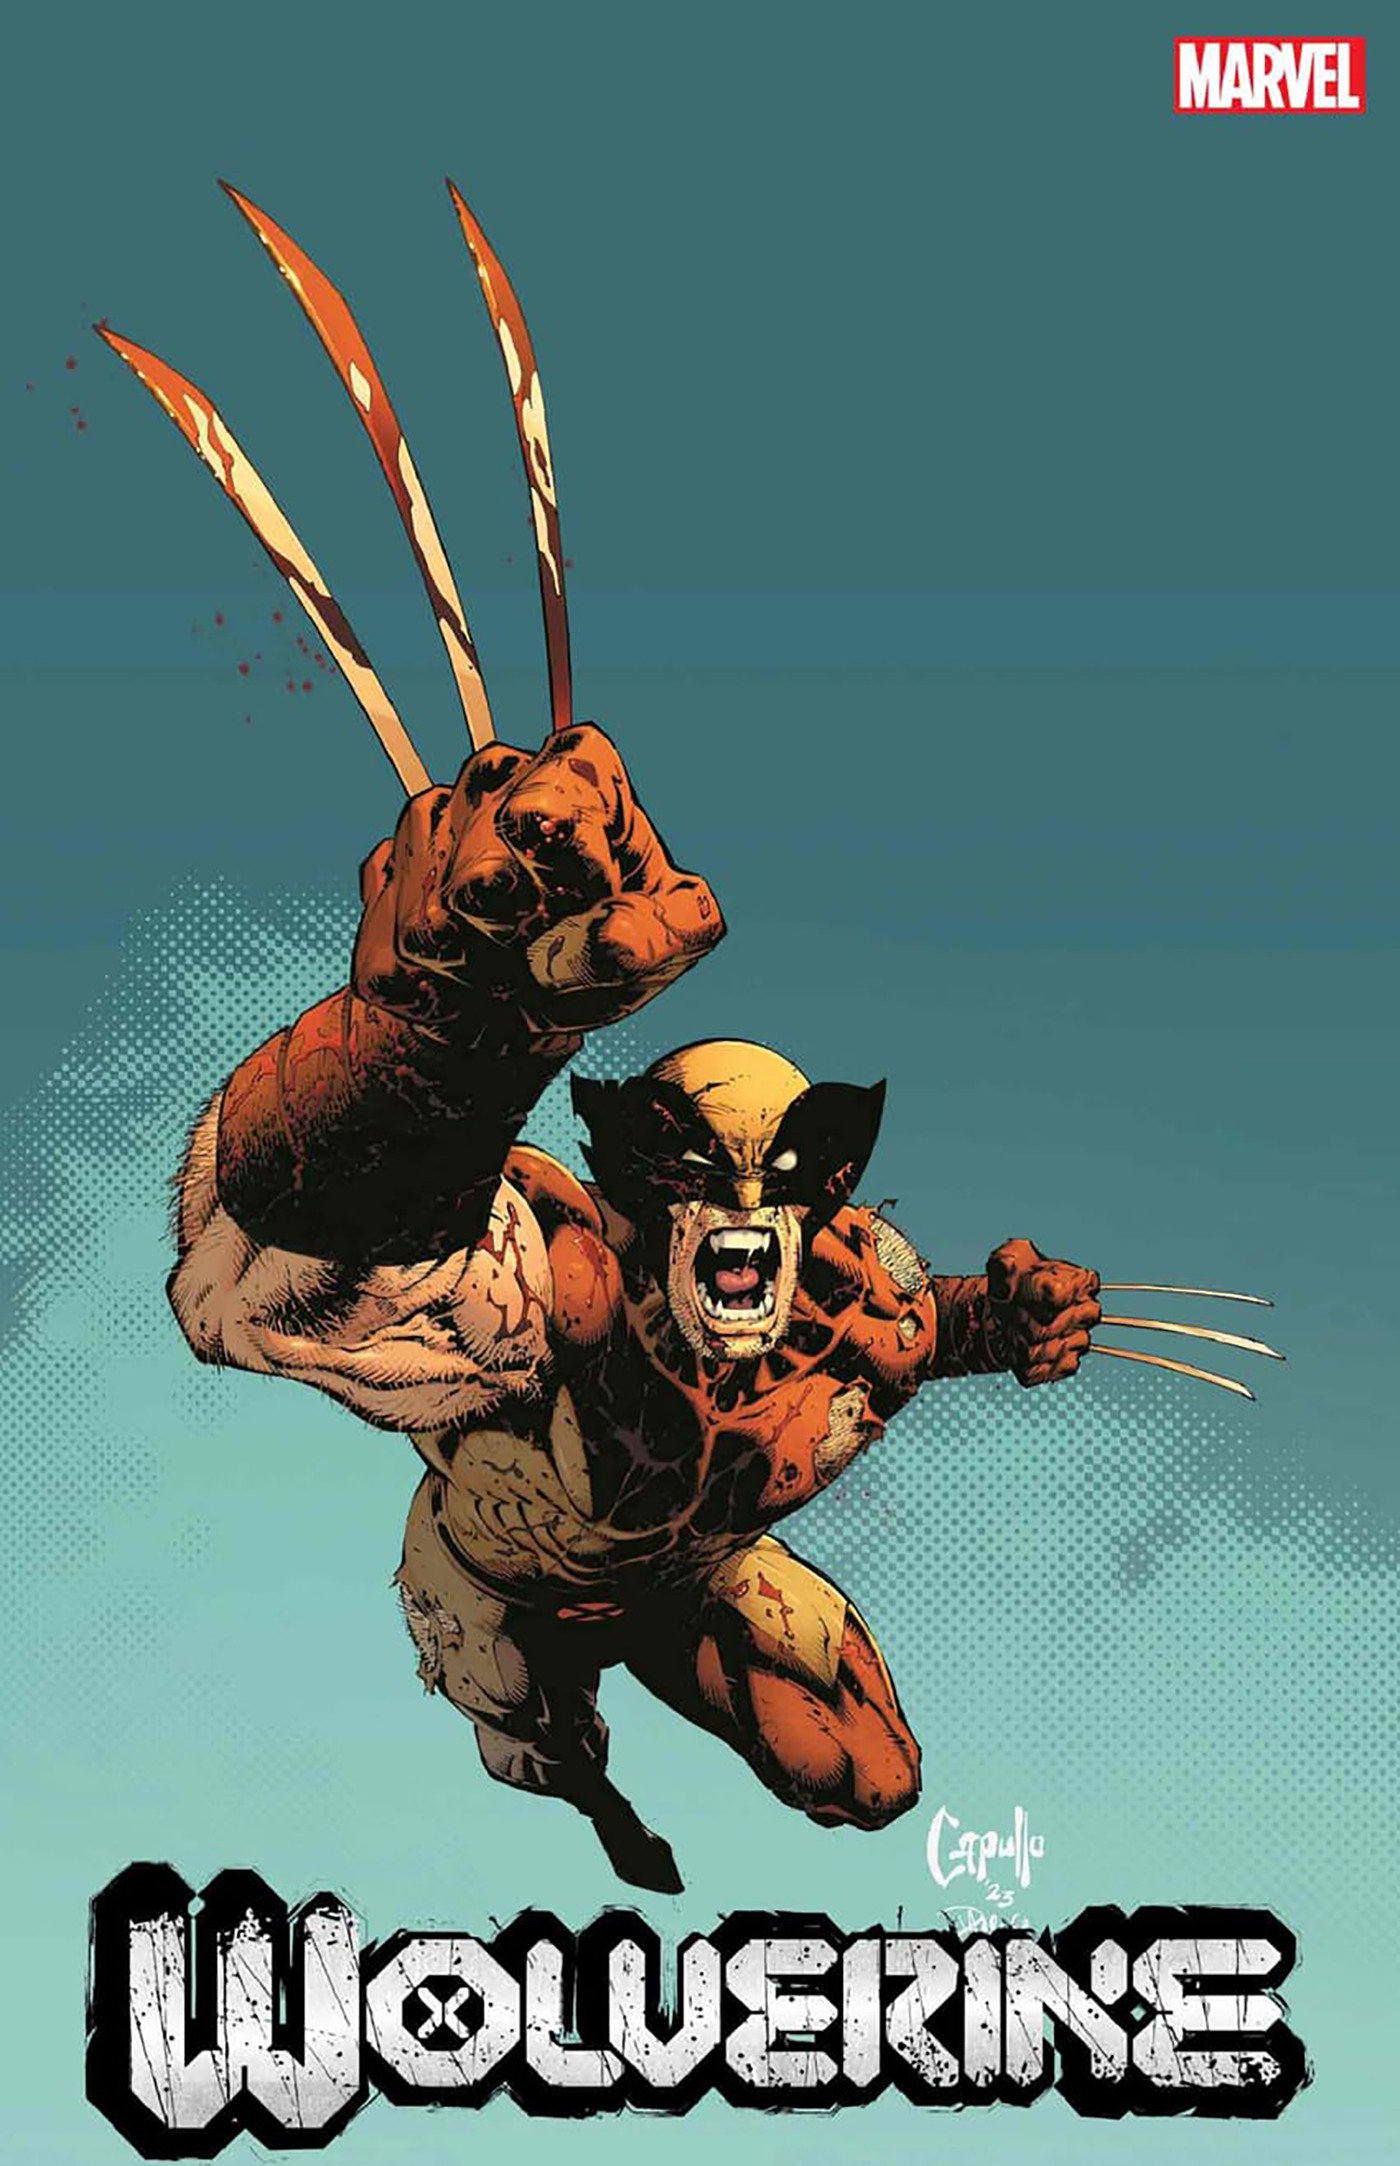 Wolverine #37 Greg Capullo Variant Cover (Fall of the X-Men)